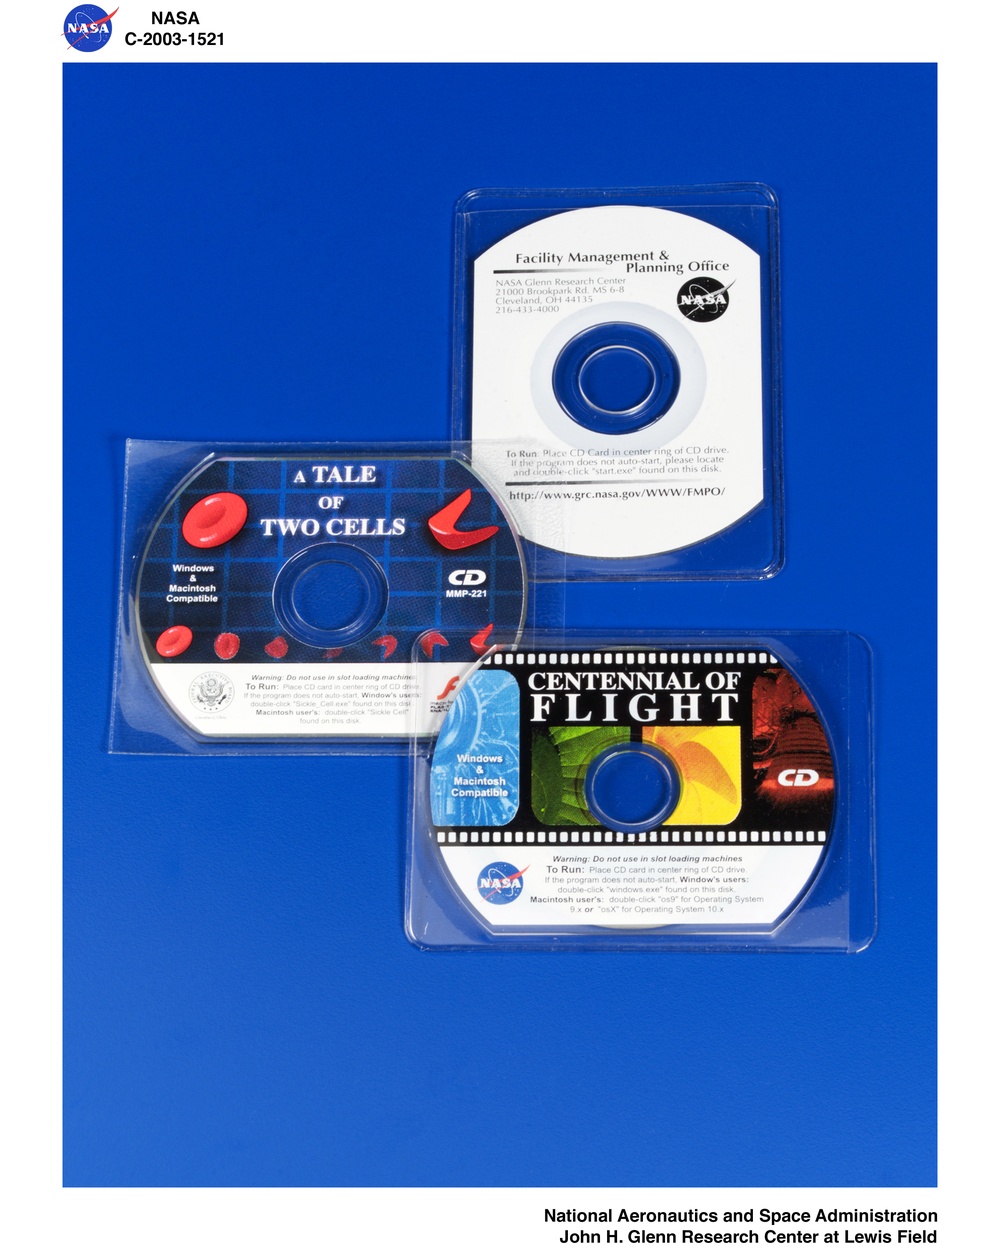 ITC Video-Multimedia Products, CD-Rom (Compace Disk-Read Only Memory) Business Cards